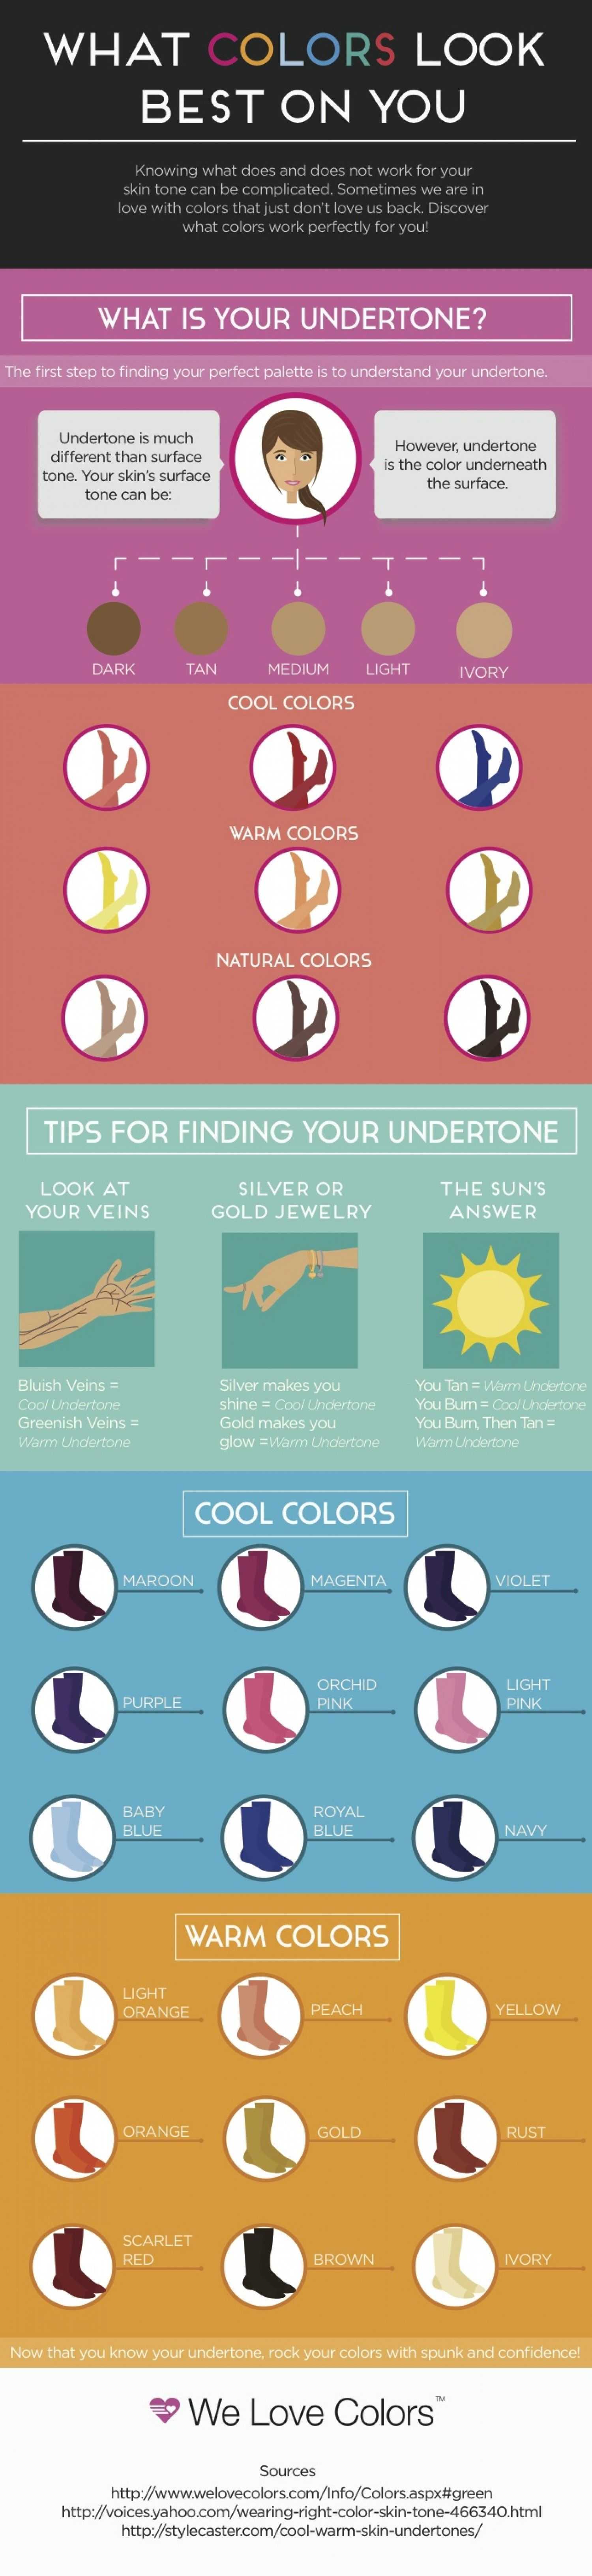 What Colors Look Best On Your Skin Tone